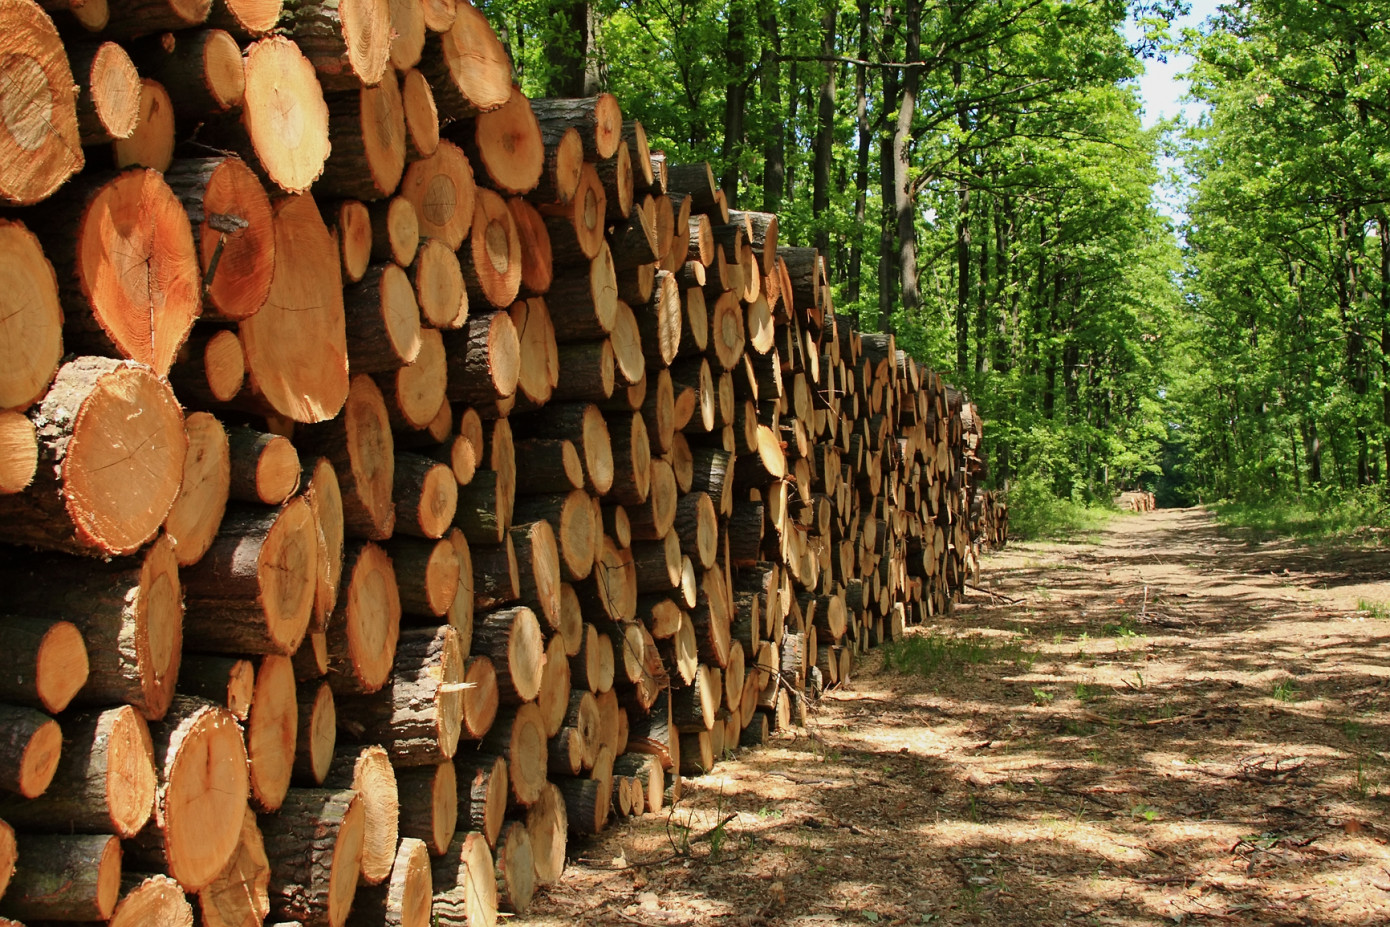 In February, price for softwood logs imported to China rises 3%